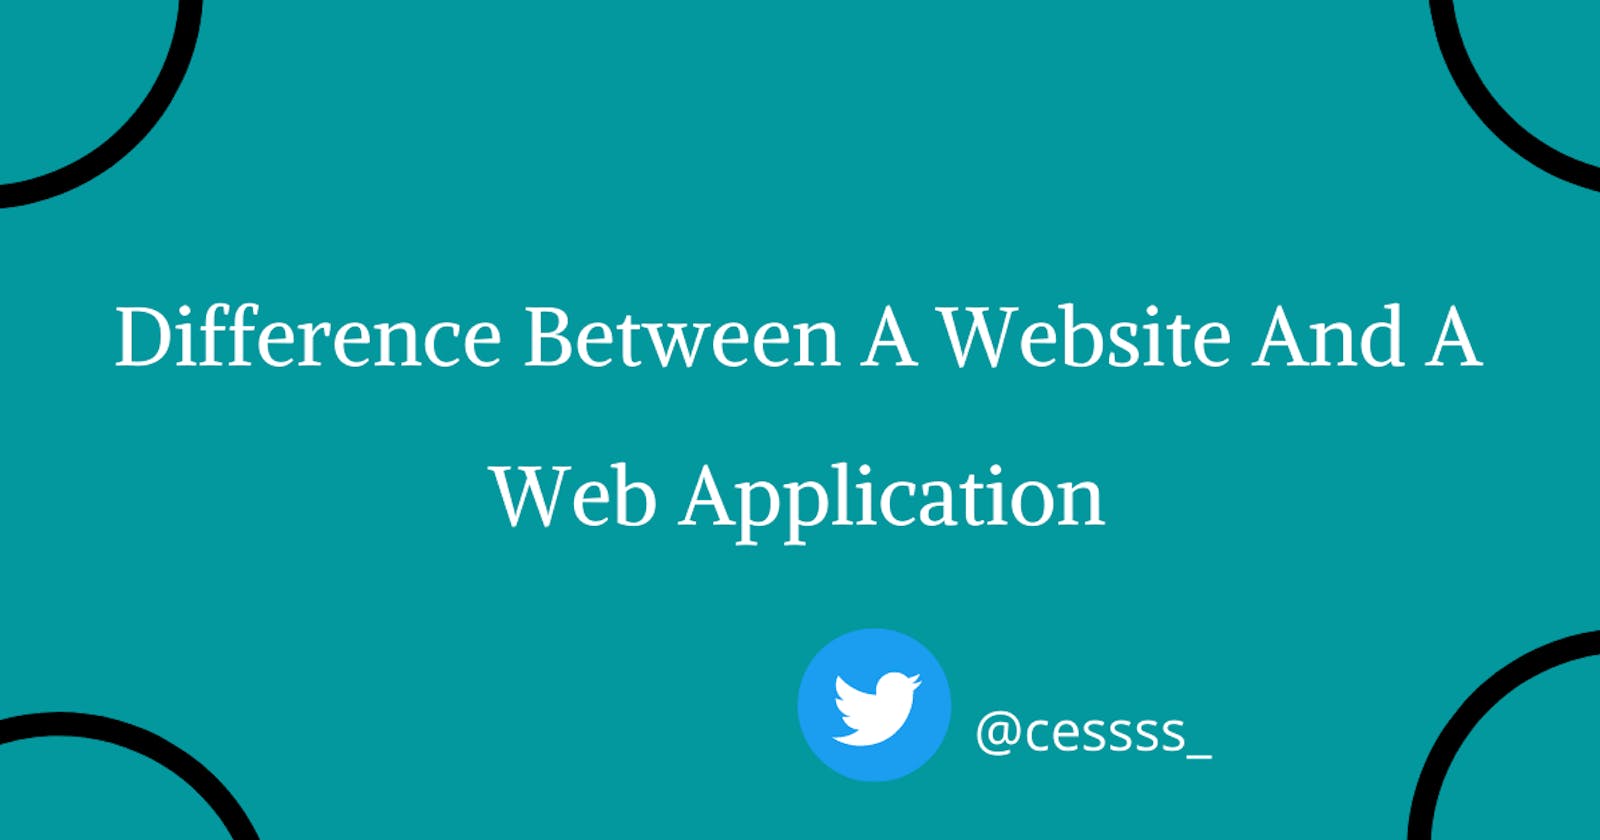 Difference Between A Website And A Web Application